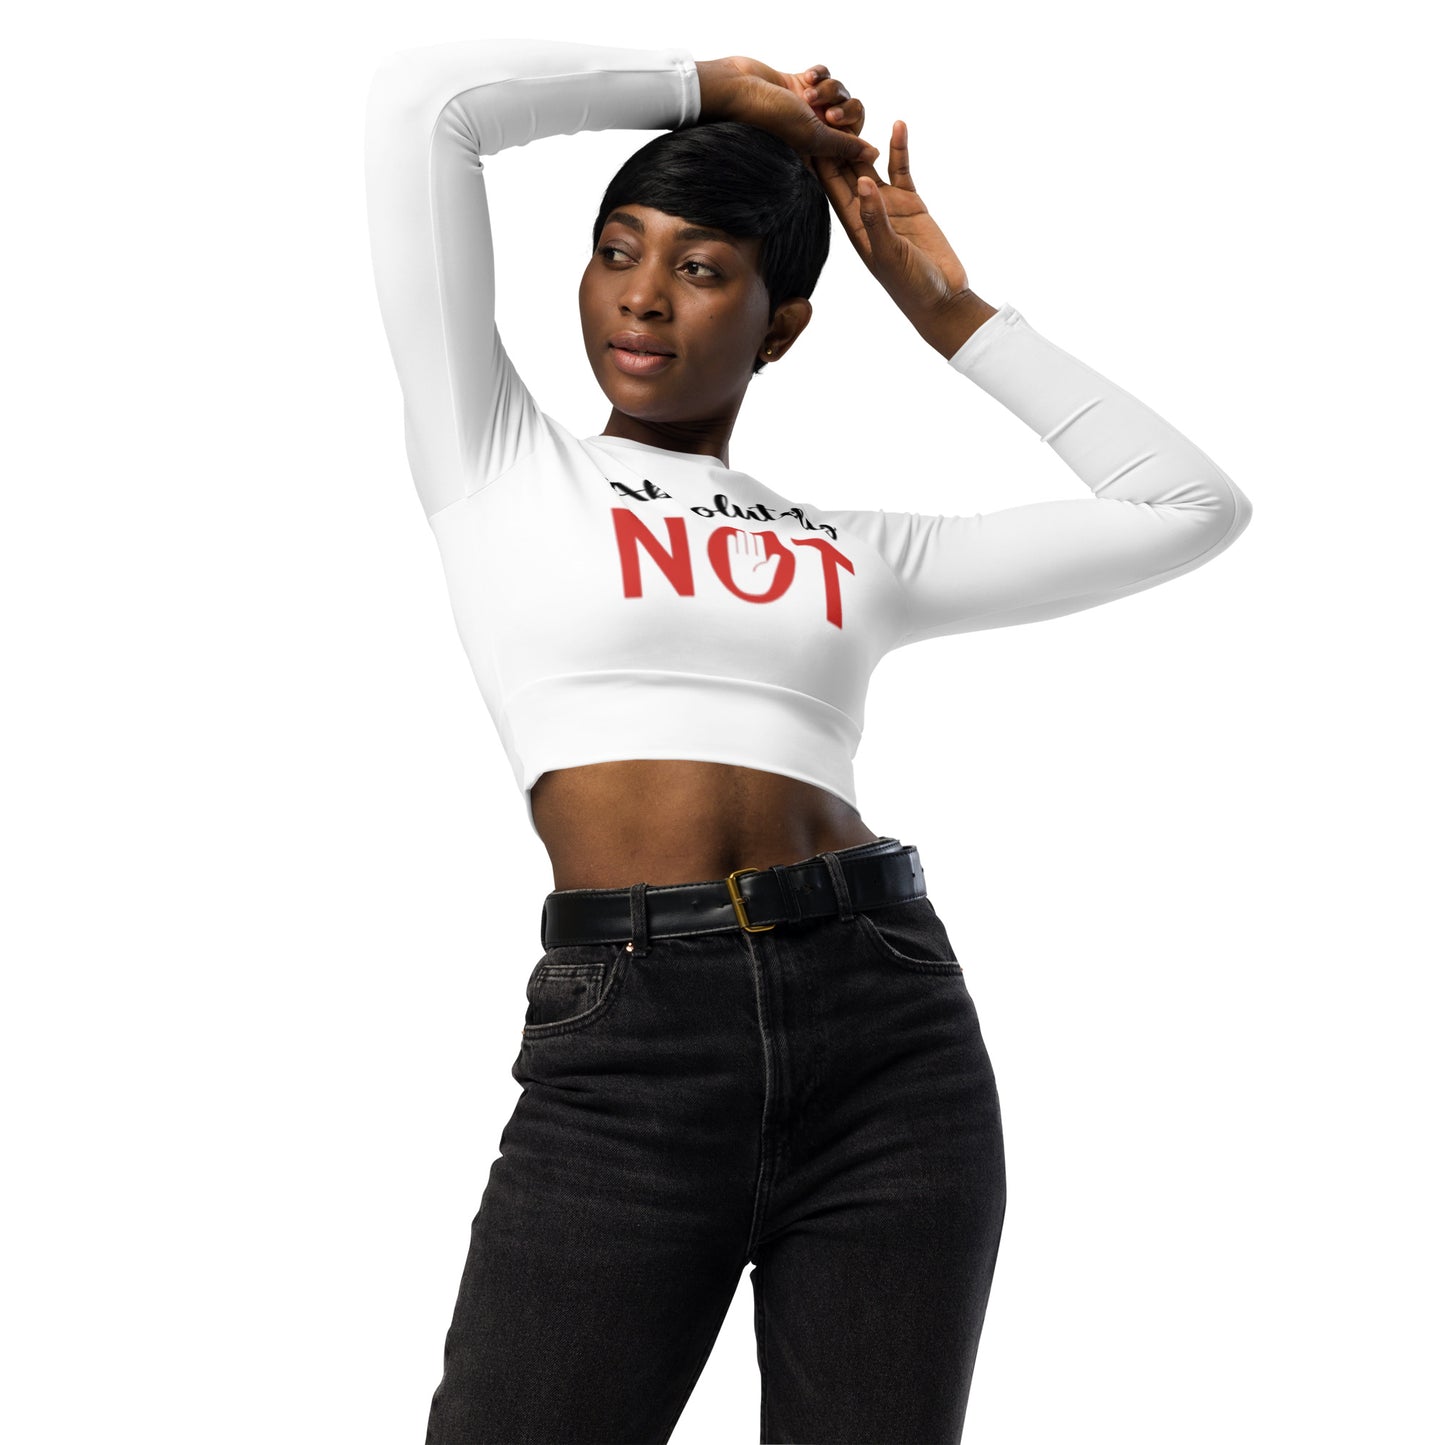 "No" Recycled Long-Sleeve Crop Top